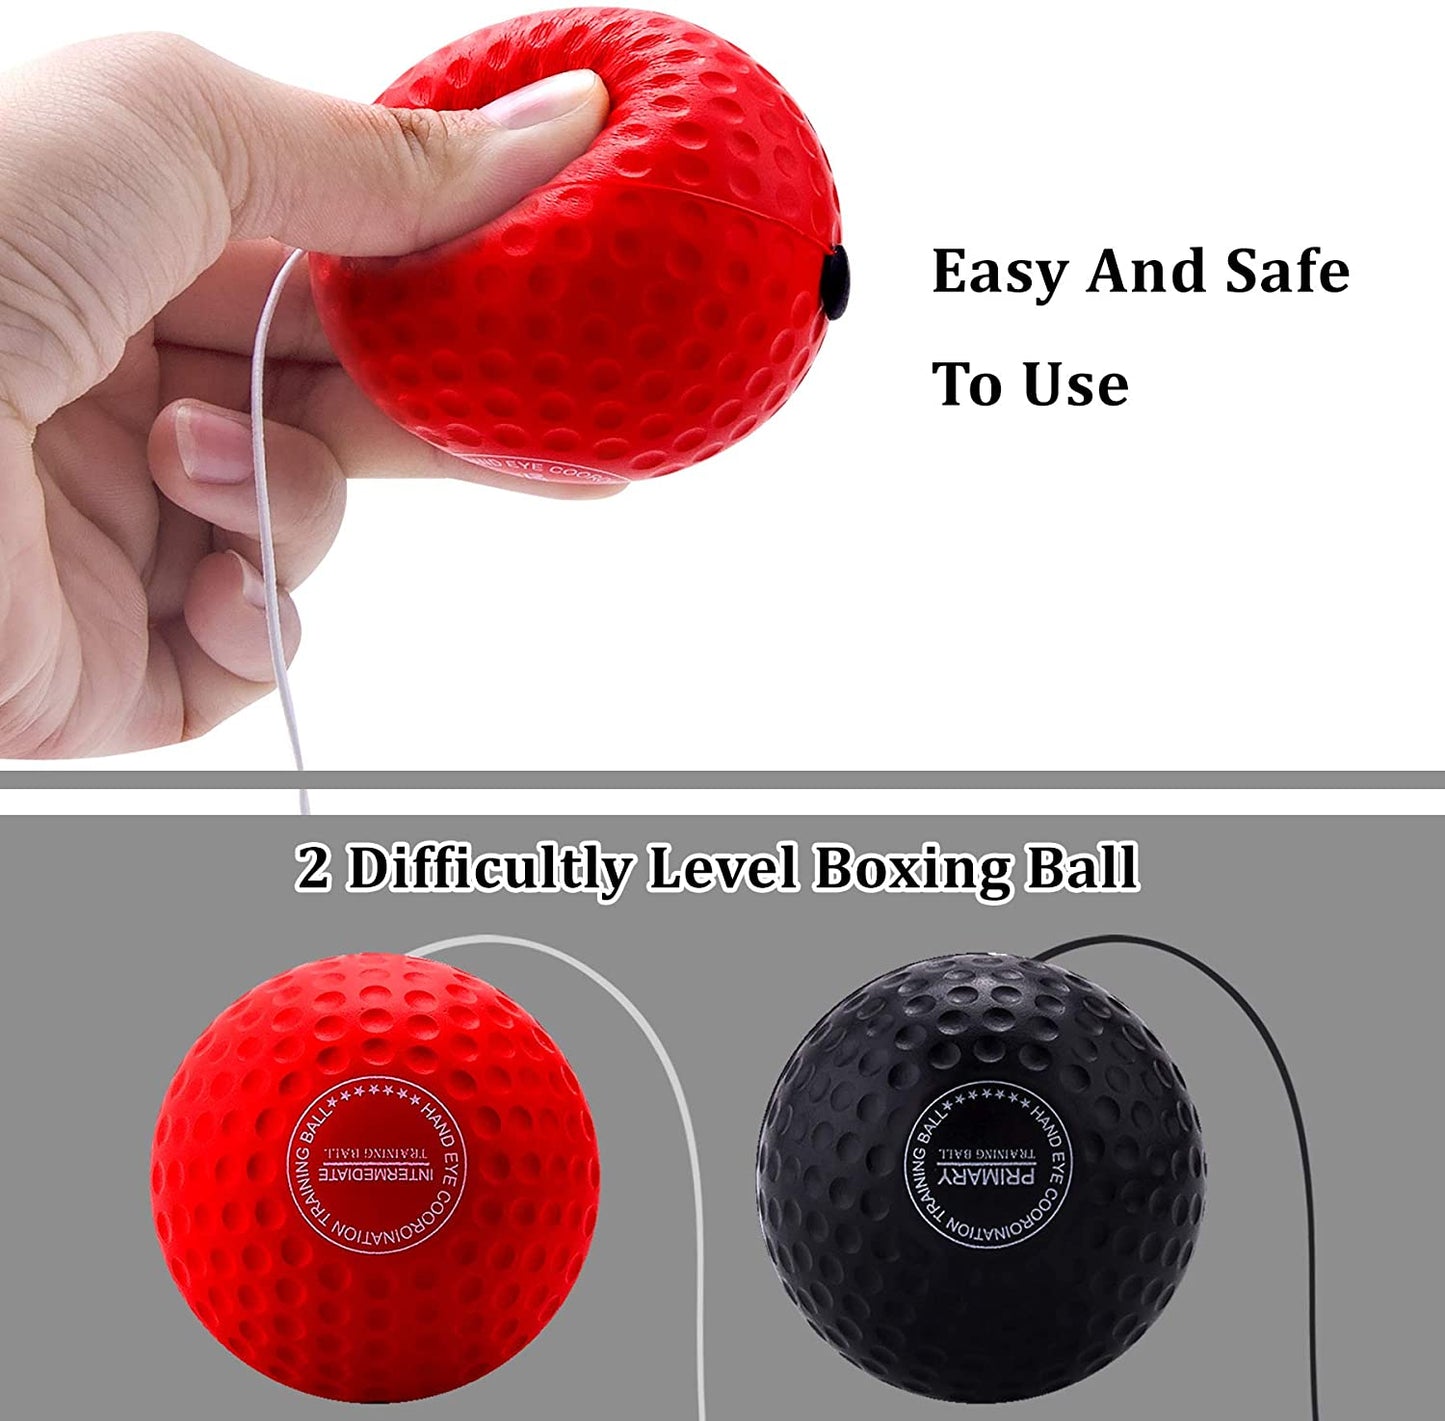 Upgraded Boxing Reflex Ball,Difficulty Levels Boxing Training Ball with Headband Perfect for Agility,Reaction, Punching Speed, Fight Skill, Fitness and Hand Eye Coordination Training,Newst Boxing Equipment for Adult and Kids Wintory